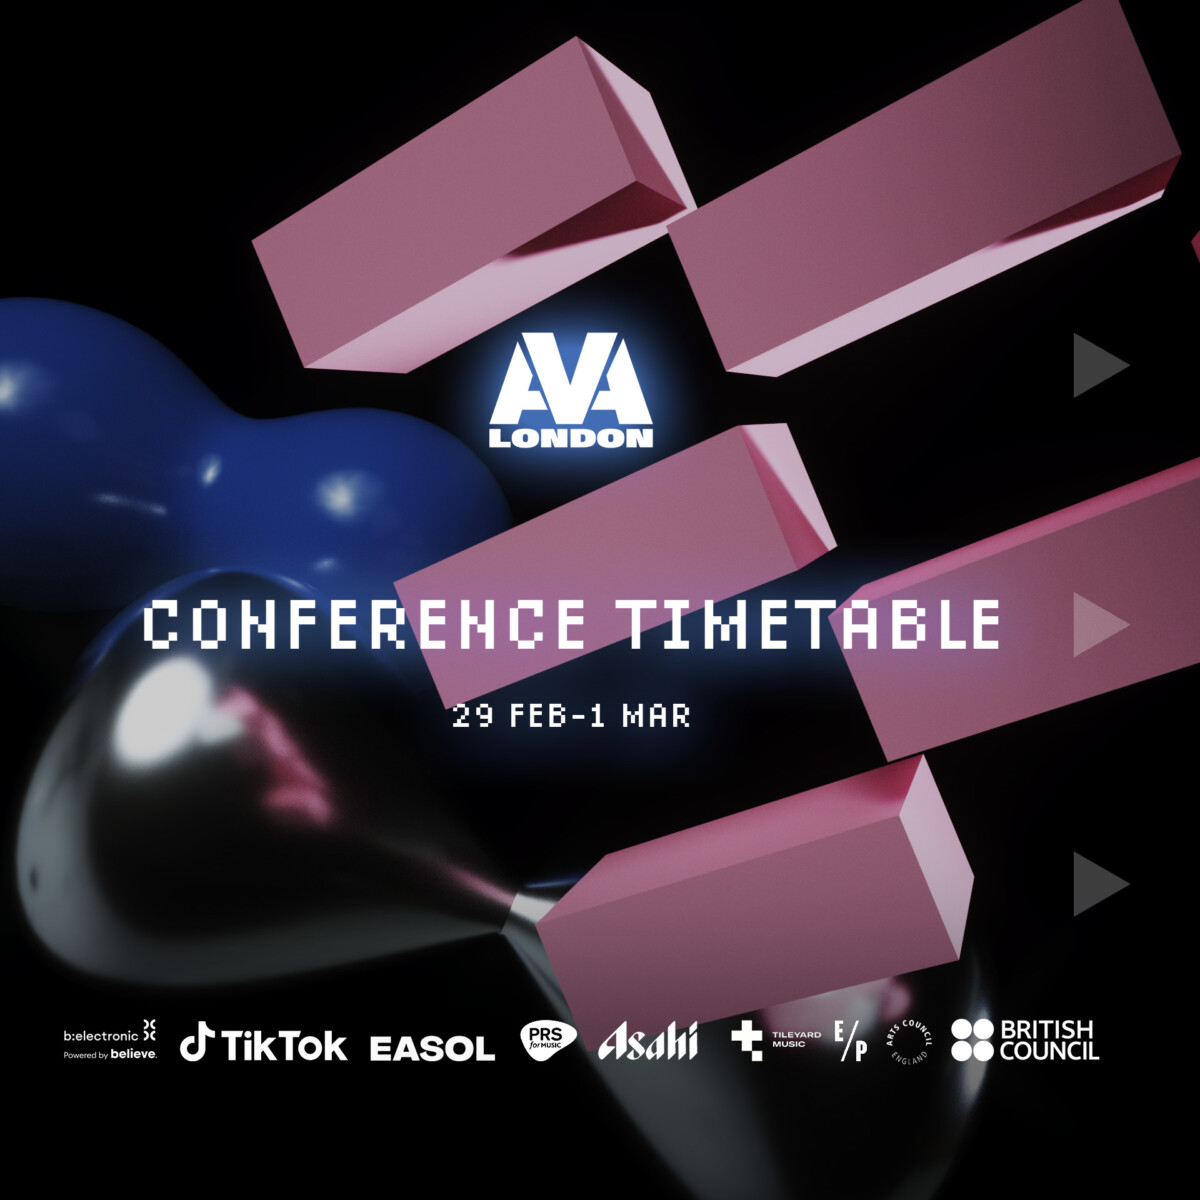 AVA London Conference Schedule